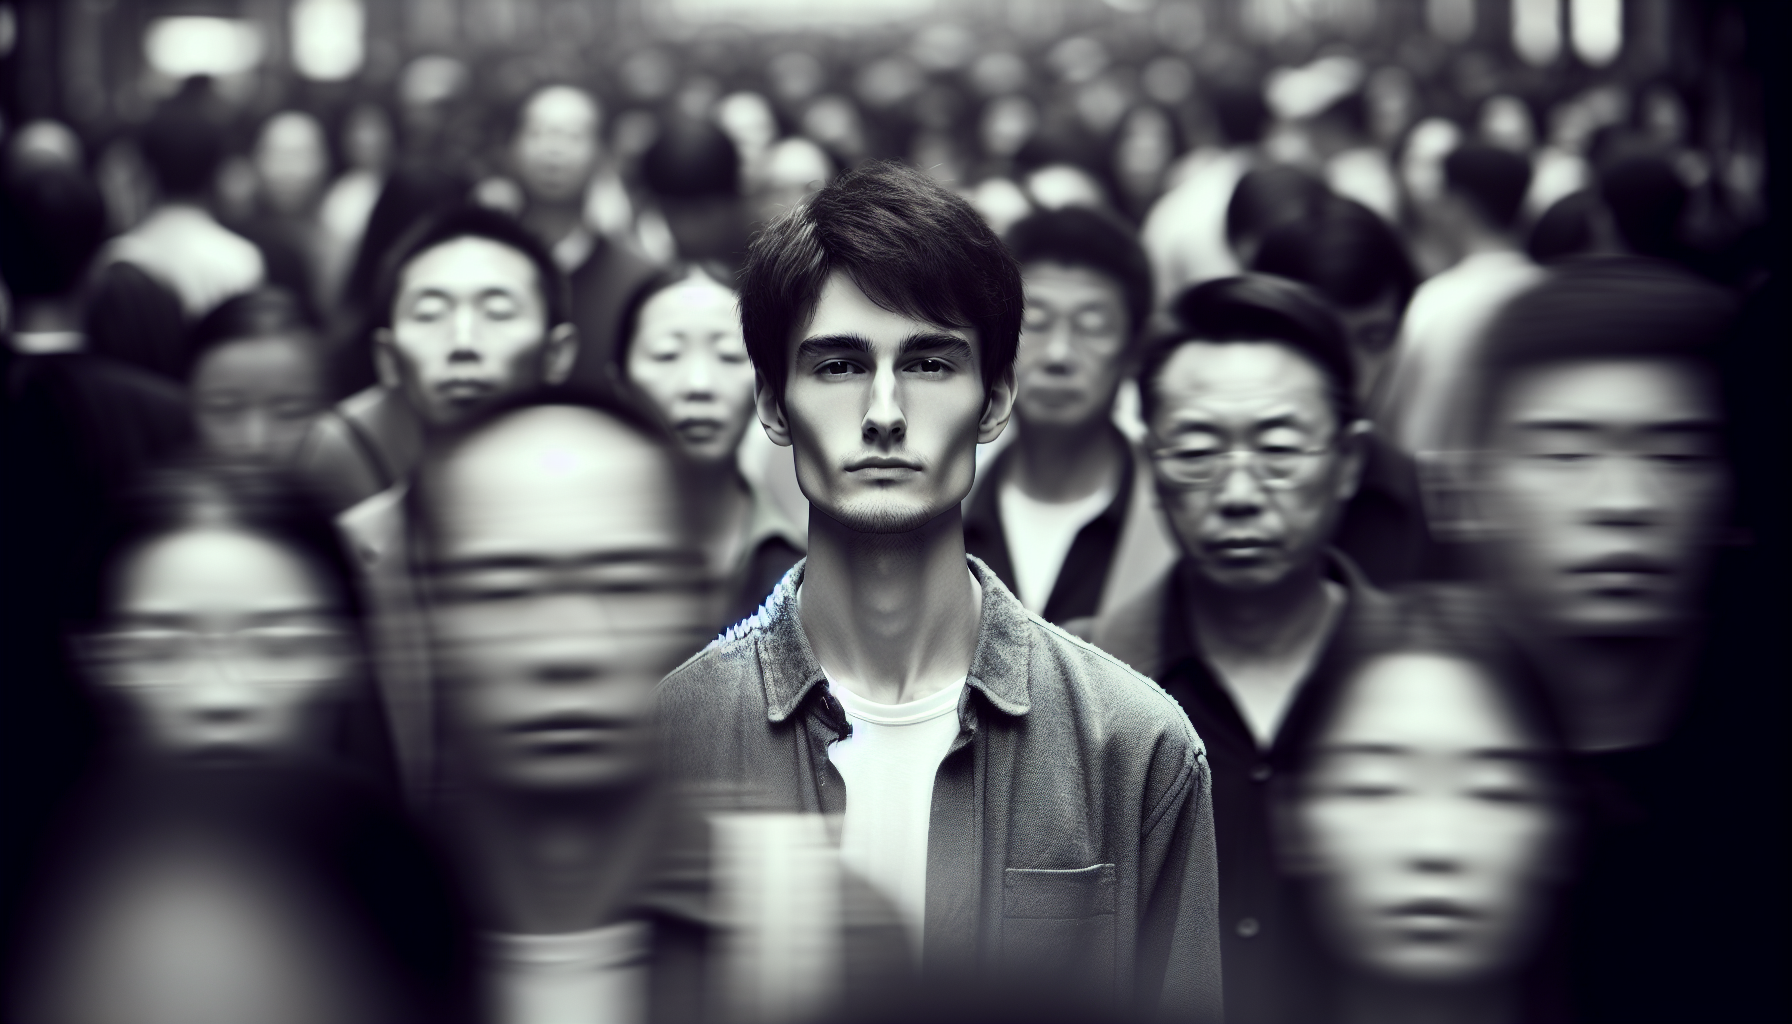 A person standing alone in a crowd, representing the impact of social rejection